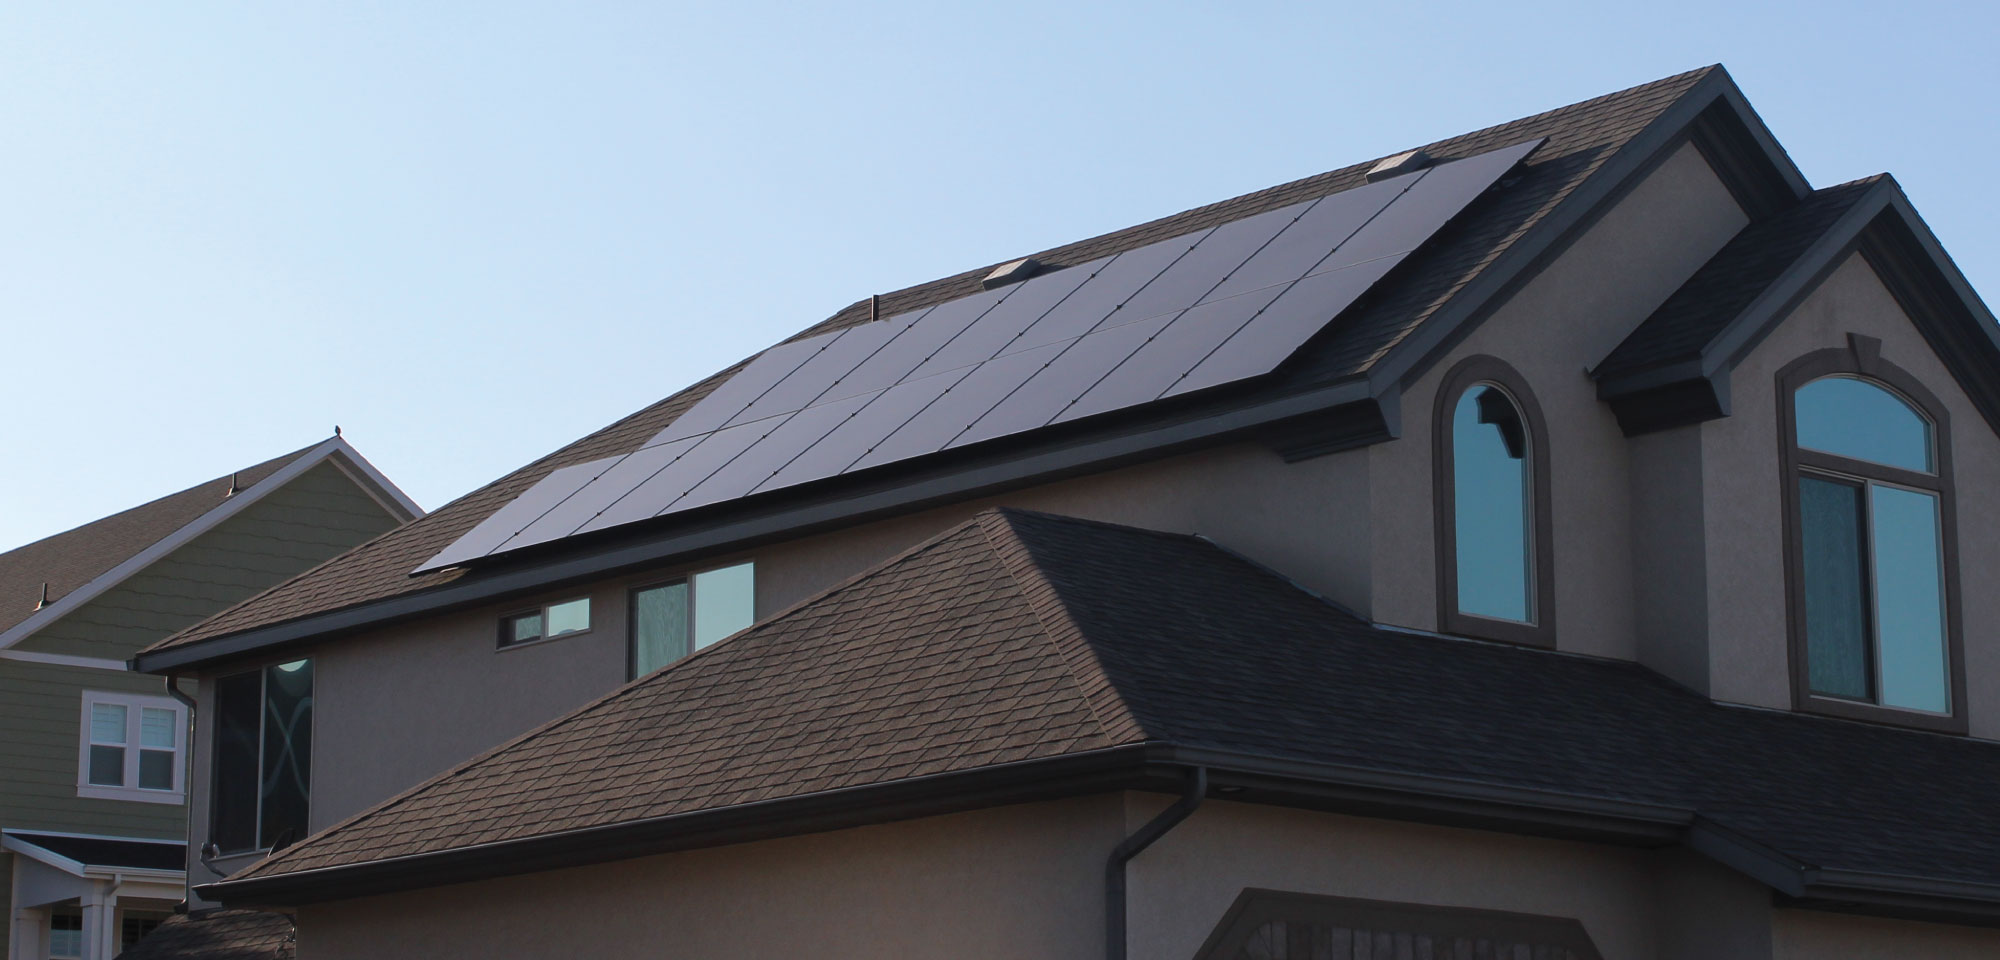 Is an 8 kW solar panel system right for you?